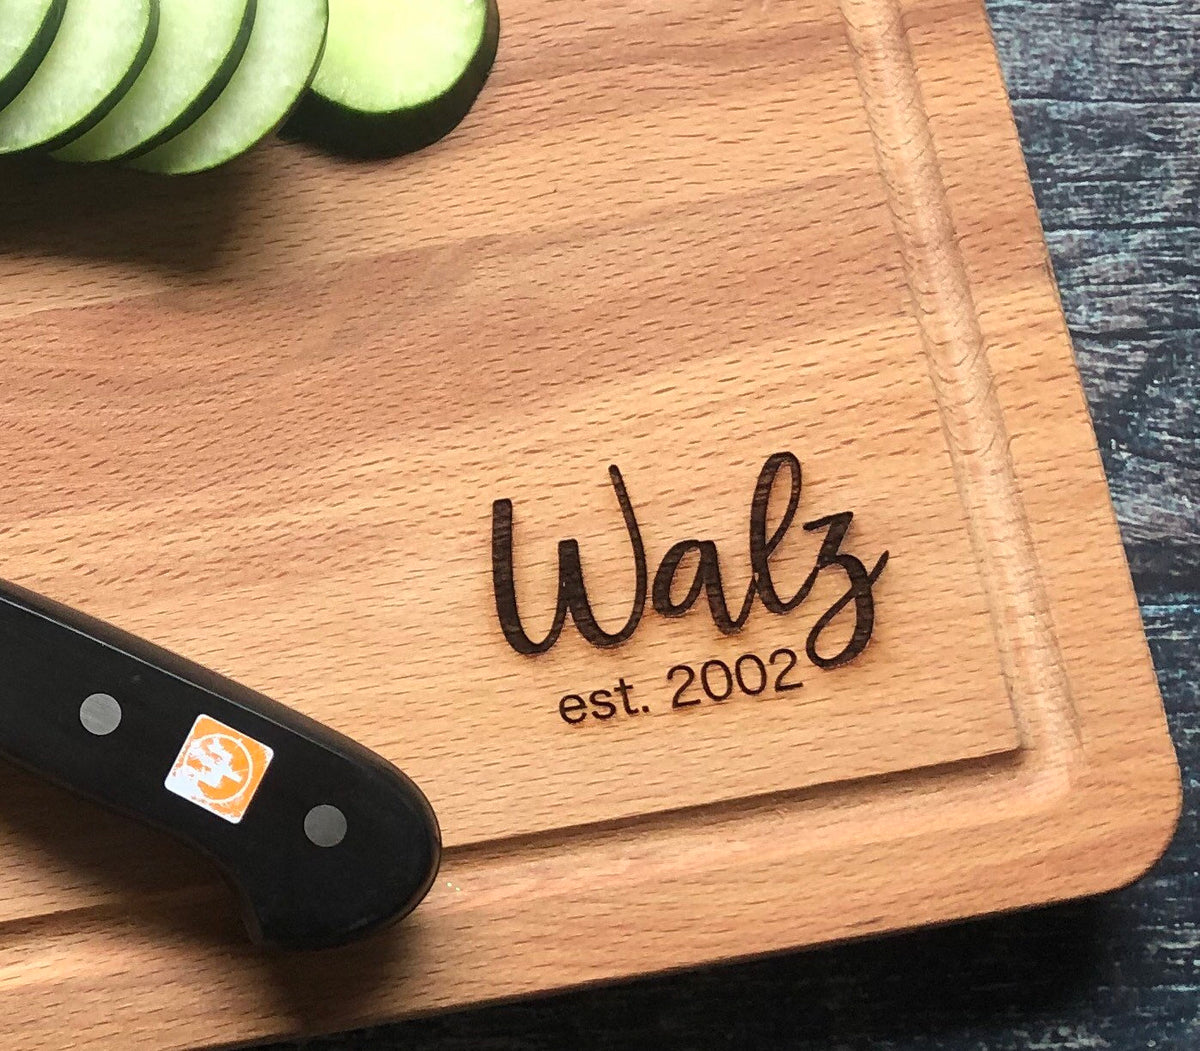 Welcome to our kitchen personalized engraved cutting board